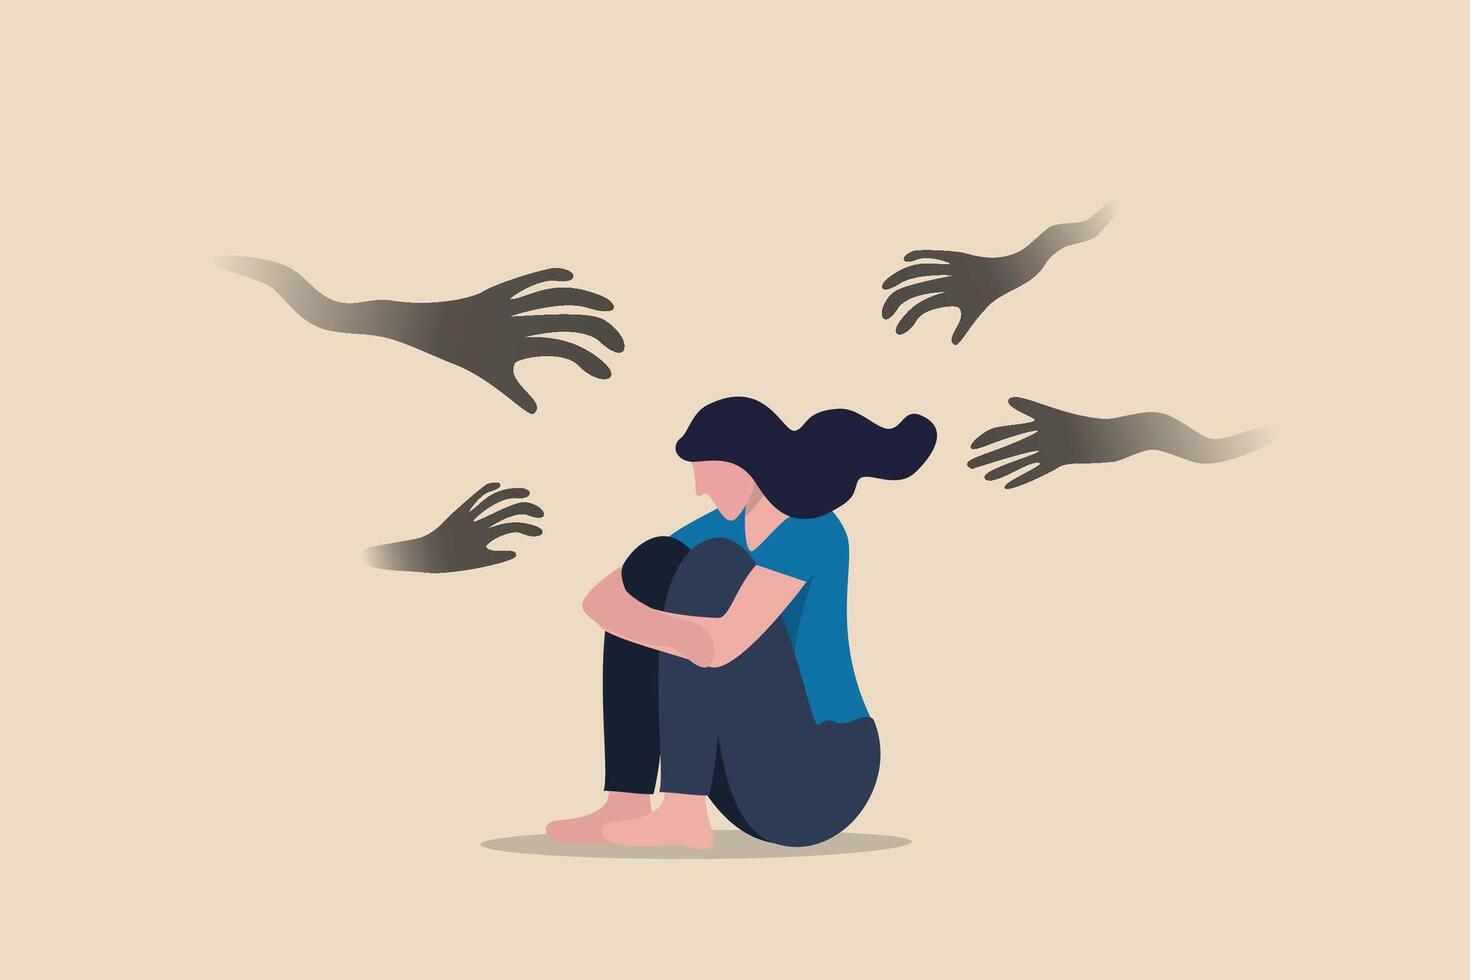 Woman abuse victim, violence or sexual harassment fear, depression or anxiety problem, social bullying or marriage suffering concept, solitude depressed woman victim sitting with abusive hands. vector